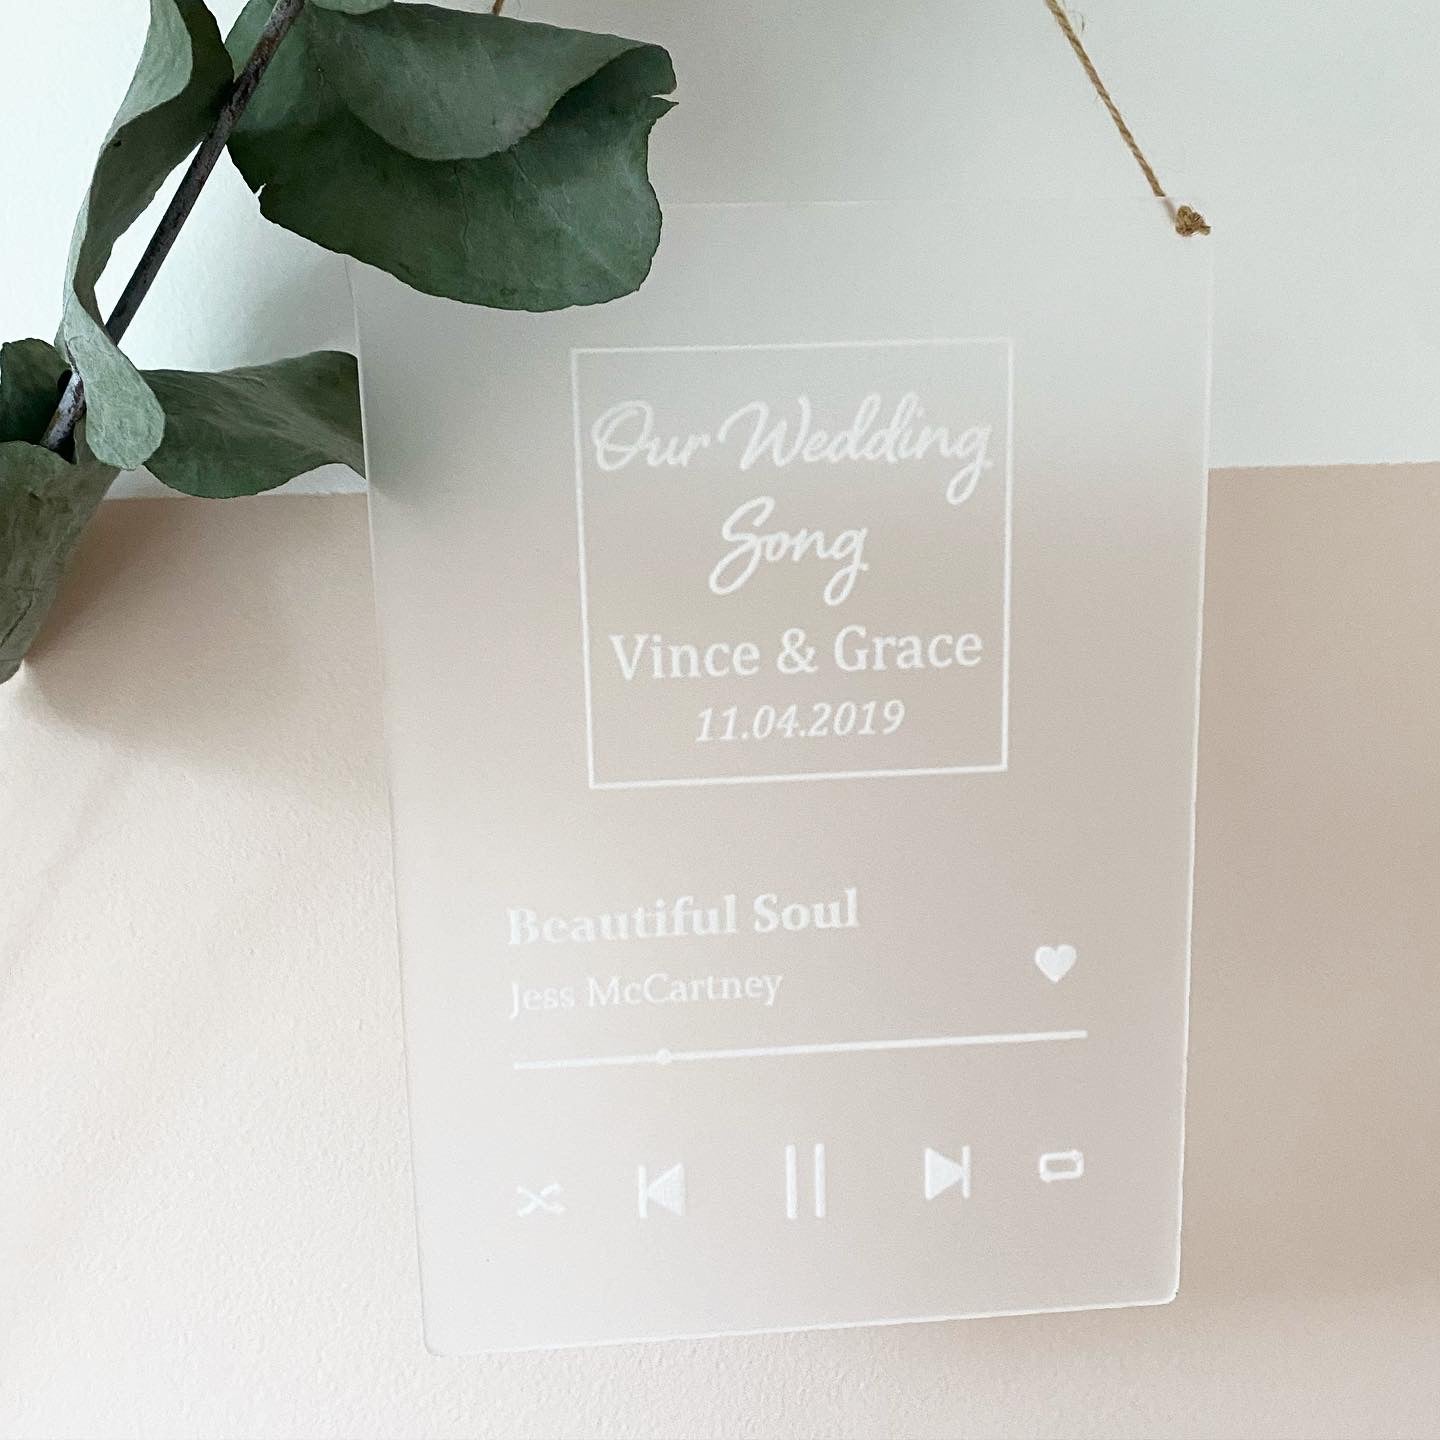 Personalised Wedding Song Sign